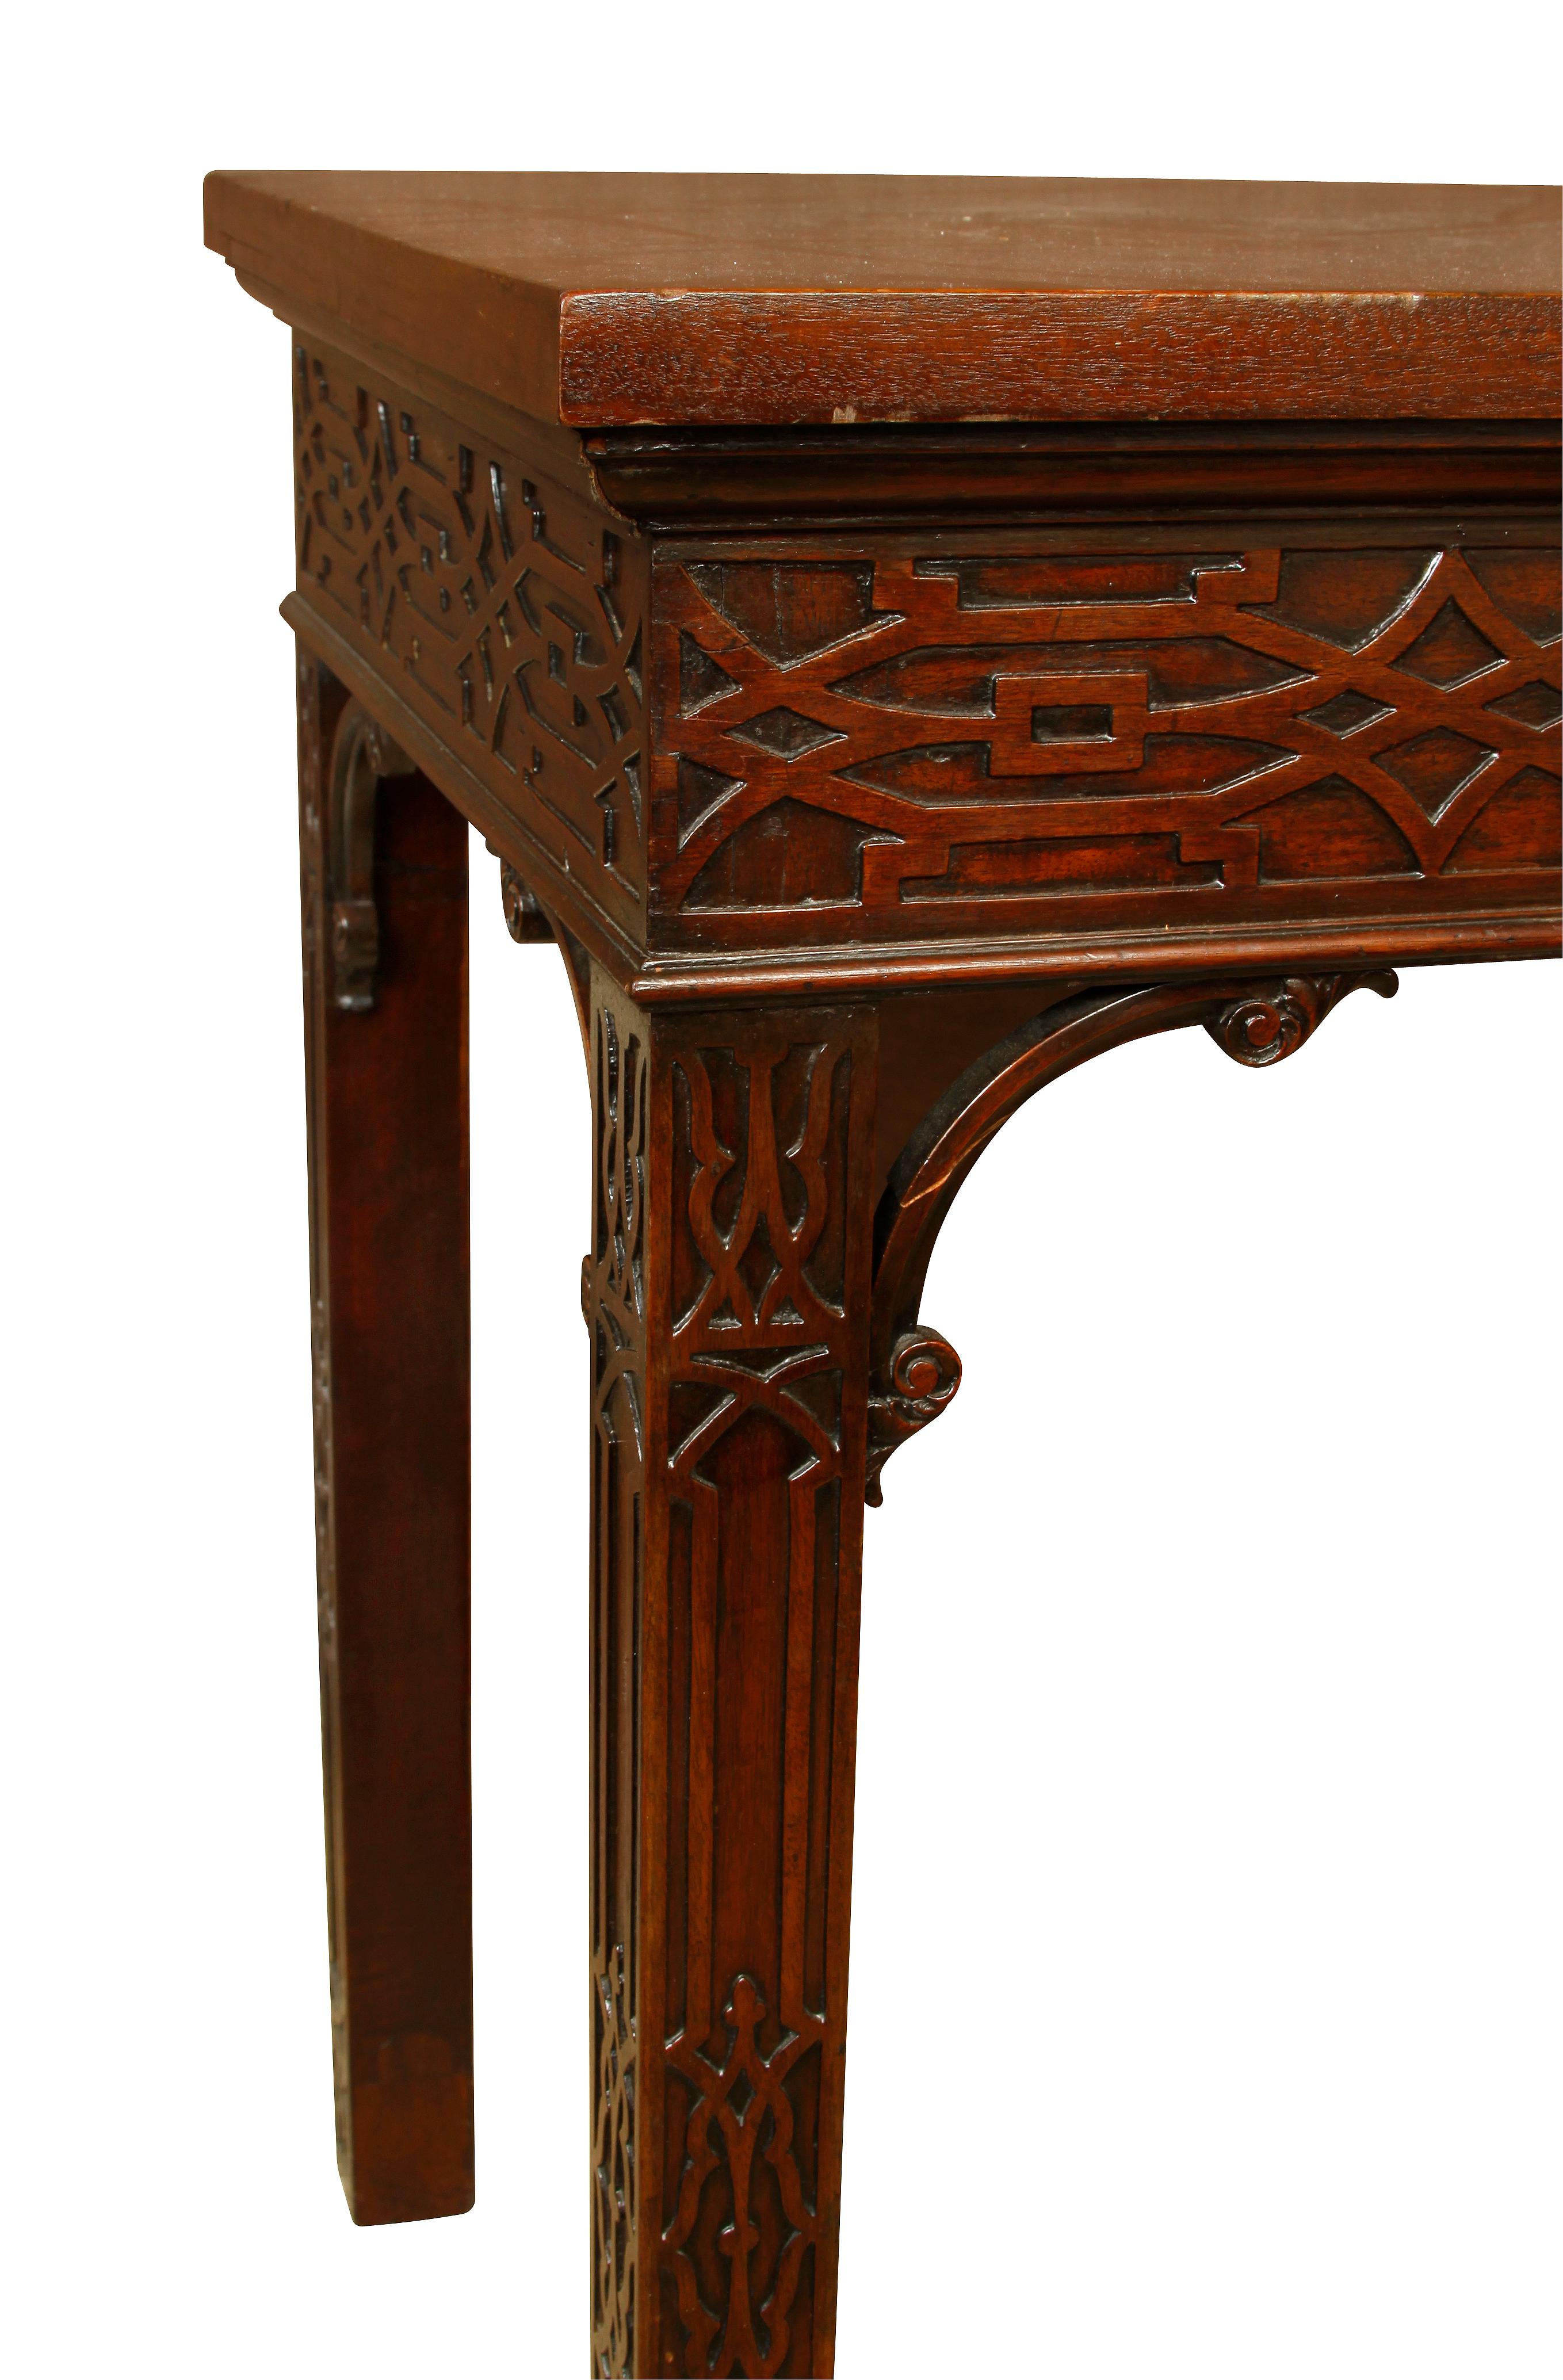 George III style mahogany console table. Carved design on apron and legs.